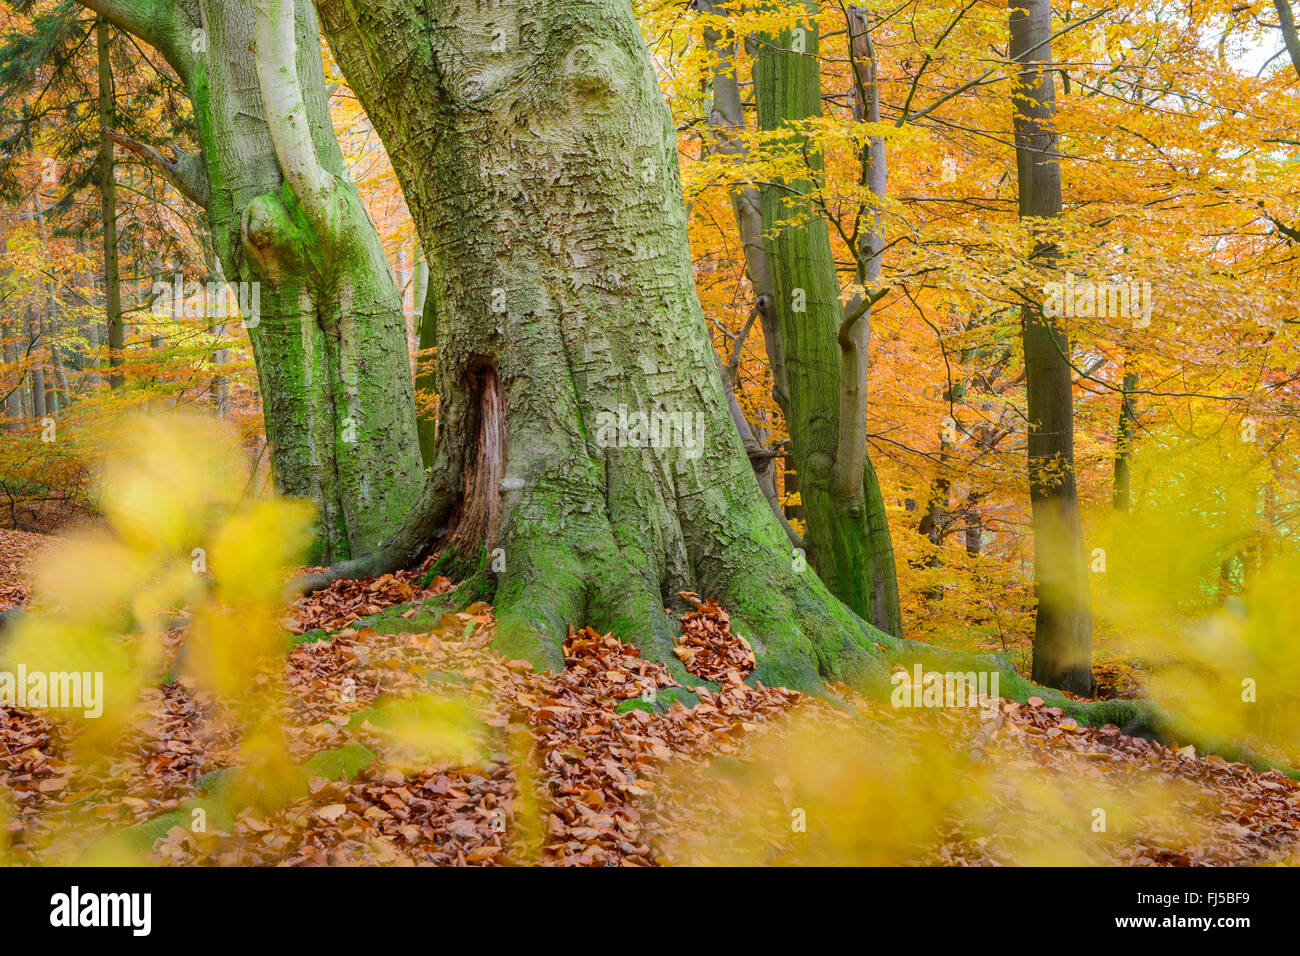 common beech (Fagus sylvatica), beech forest at the Hohes Ufer near Doetlingen, Germany, Lower Saxony, Oldenburger Land Stock Photo